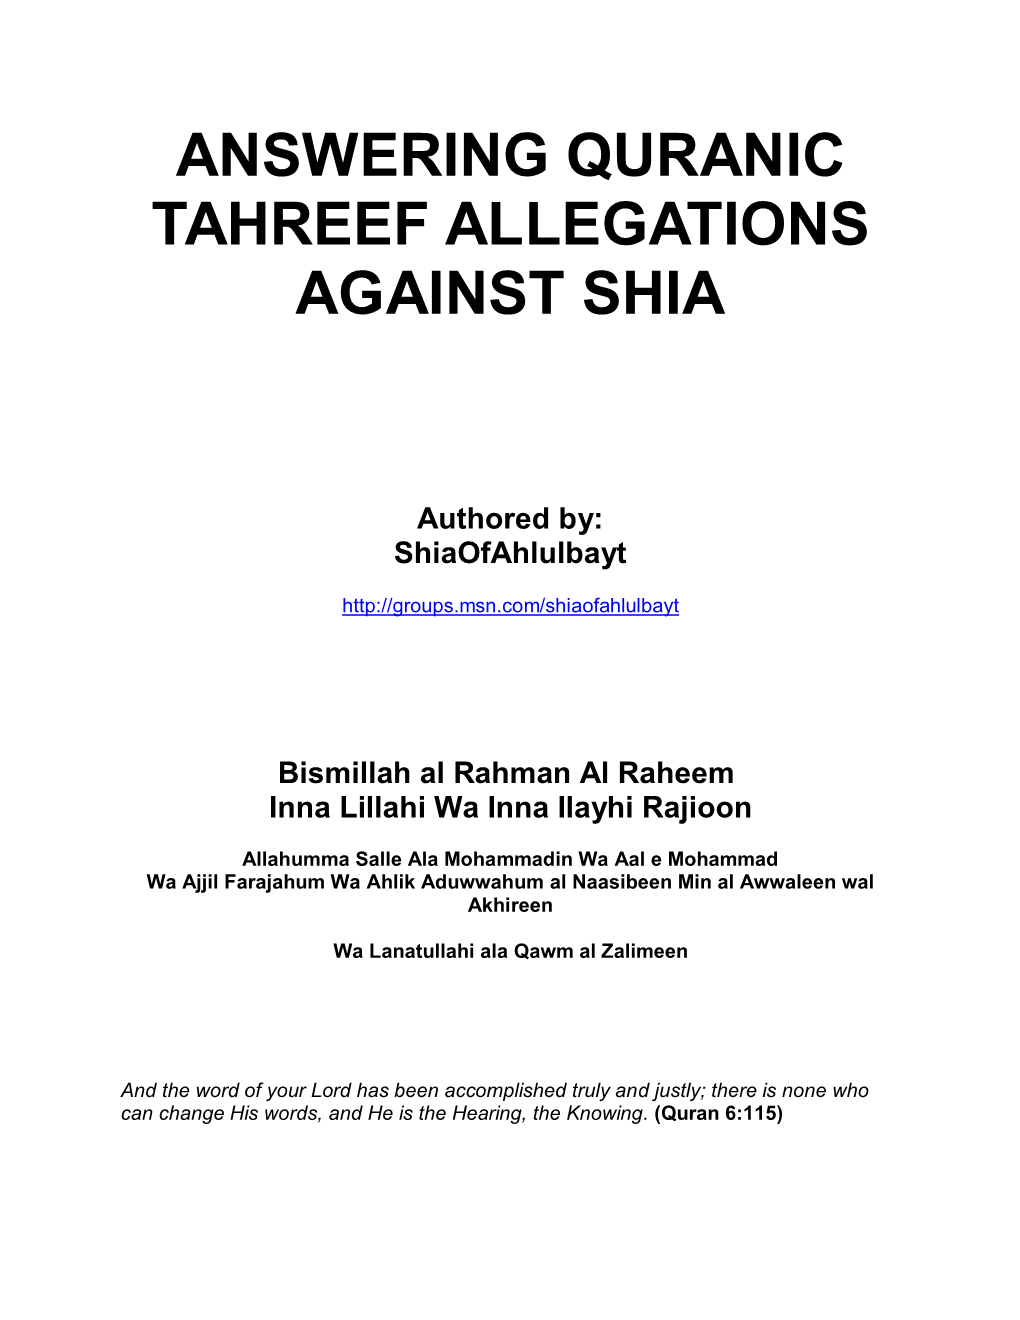 Answering Quranic Tahreef Allegations Against Shia